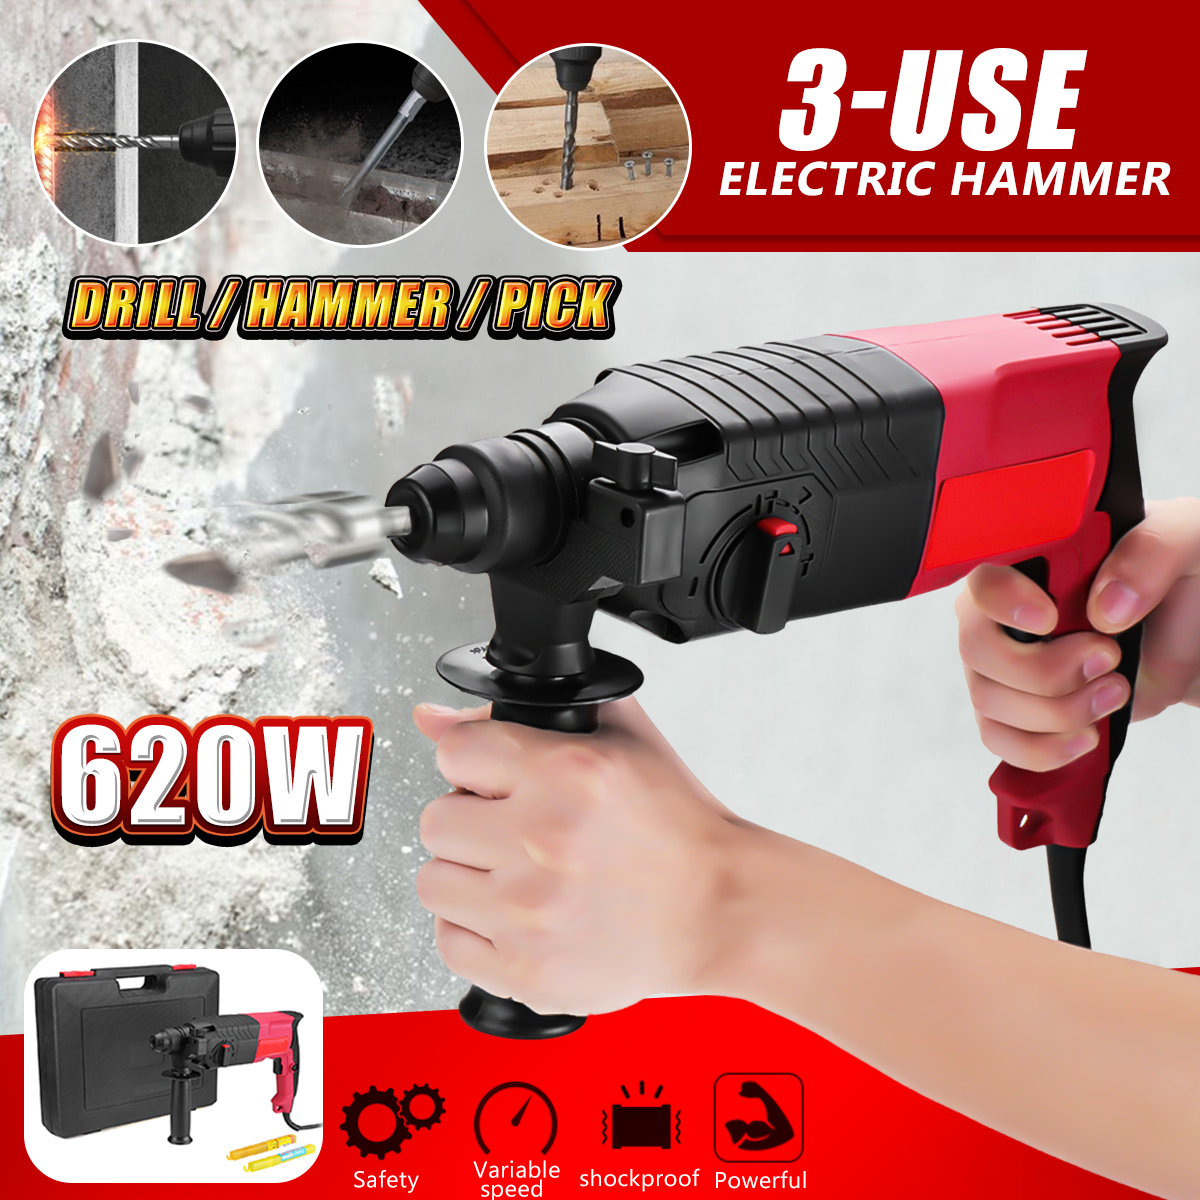 3-In1-620W-24mm-Electric-Hammer-Multifunction-Electric-Drill-Hammer-Pick-Punch-Bit-Set-1409169-1